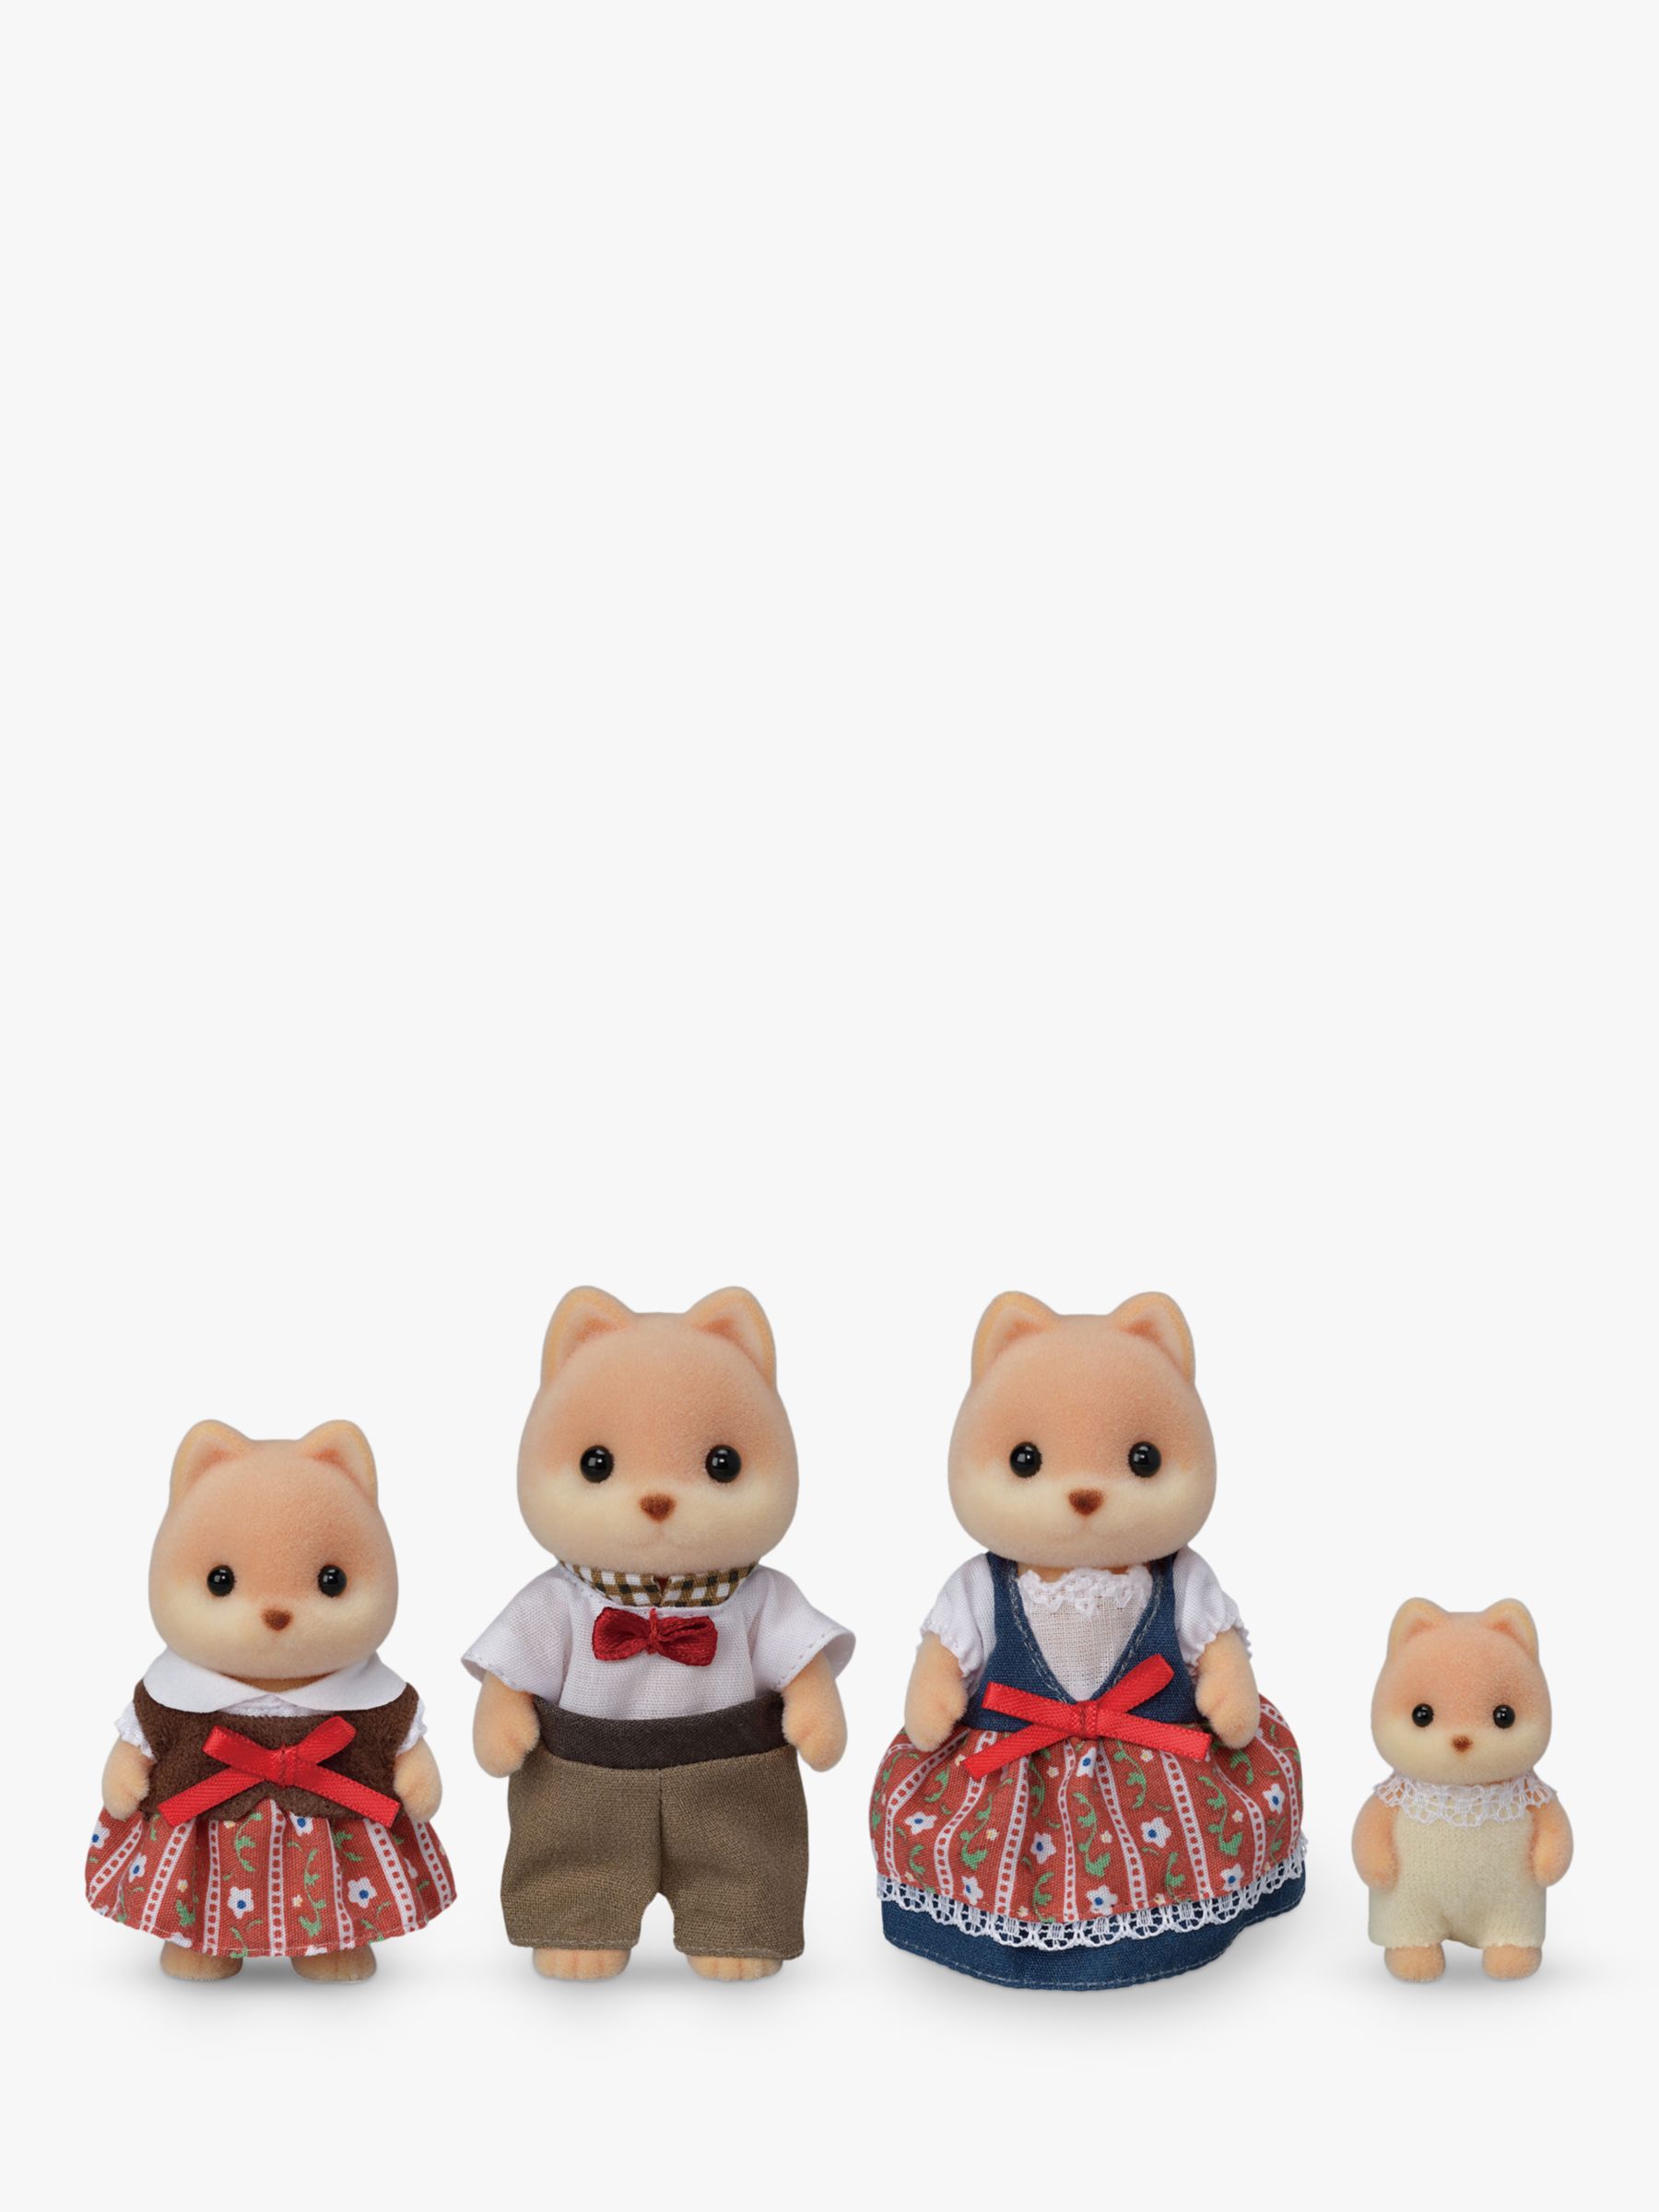 sylvanian families offers